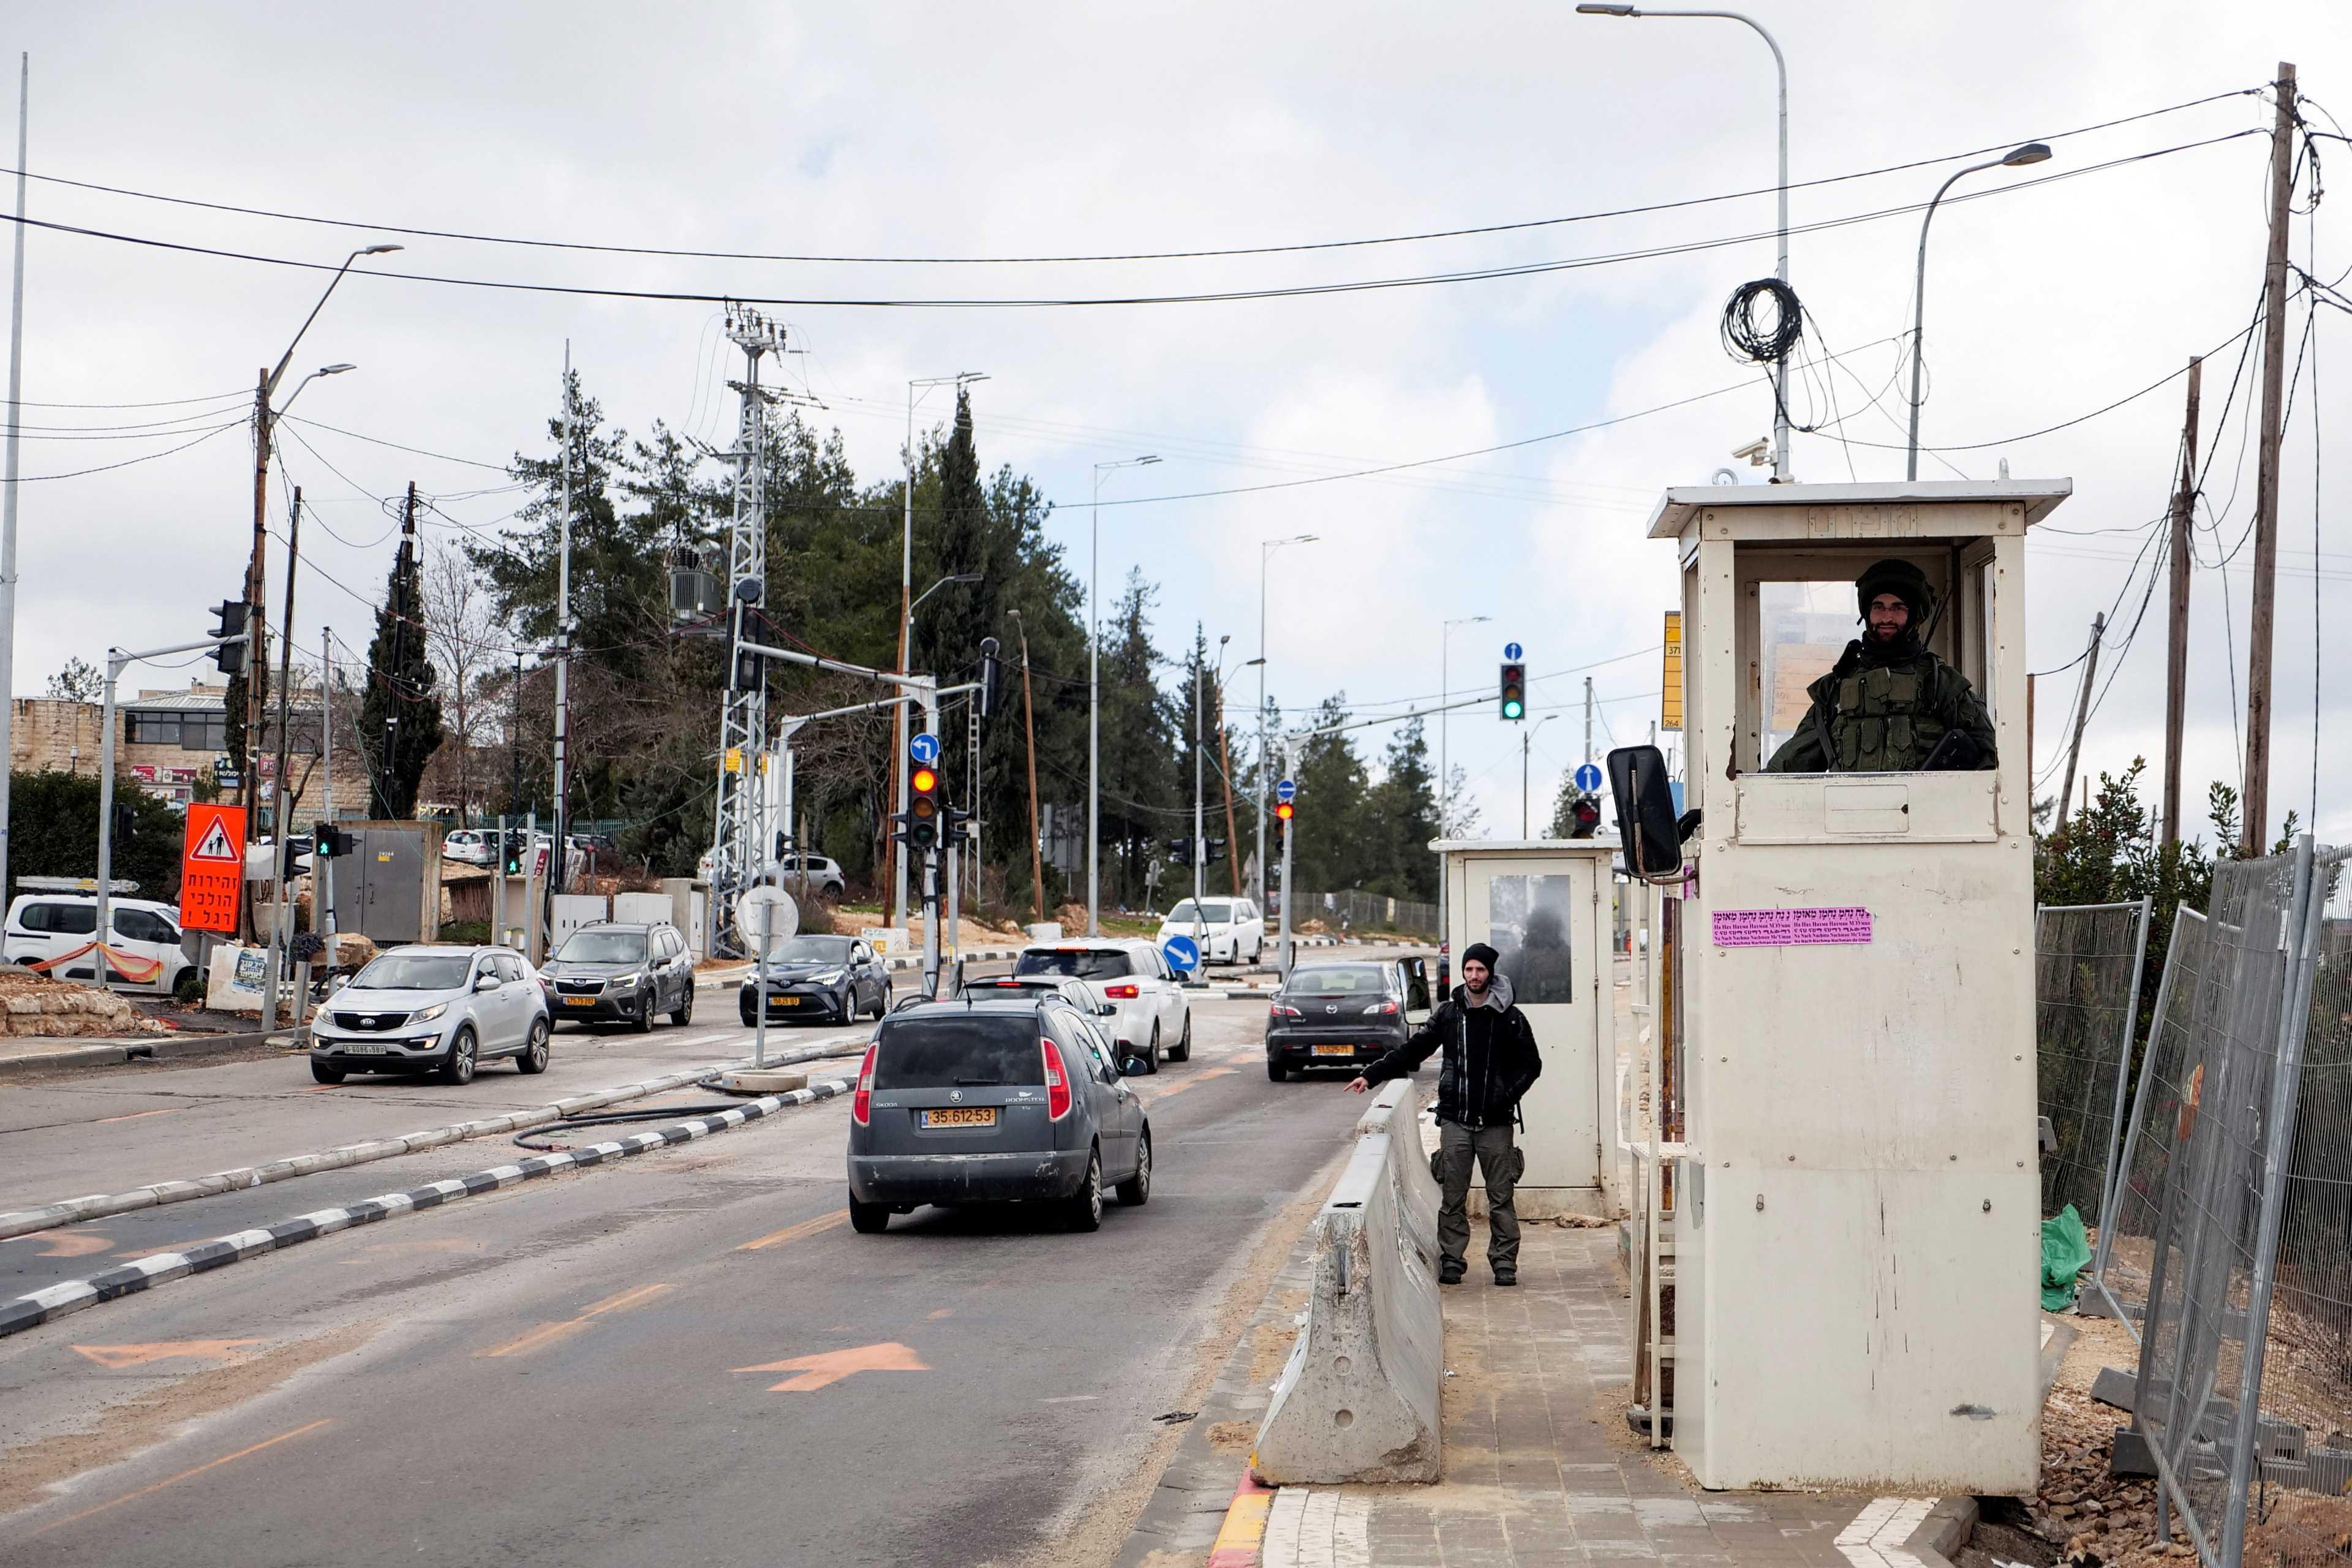 Soldiers stand guard at Gush Etzion Junction in the Gush Etzion settlements compound, in the Israeli-occupied West Bank Feb 2. Photo: Reuters